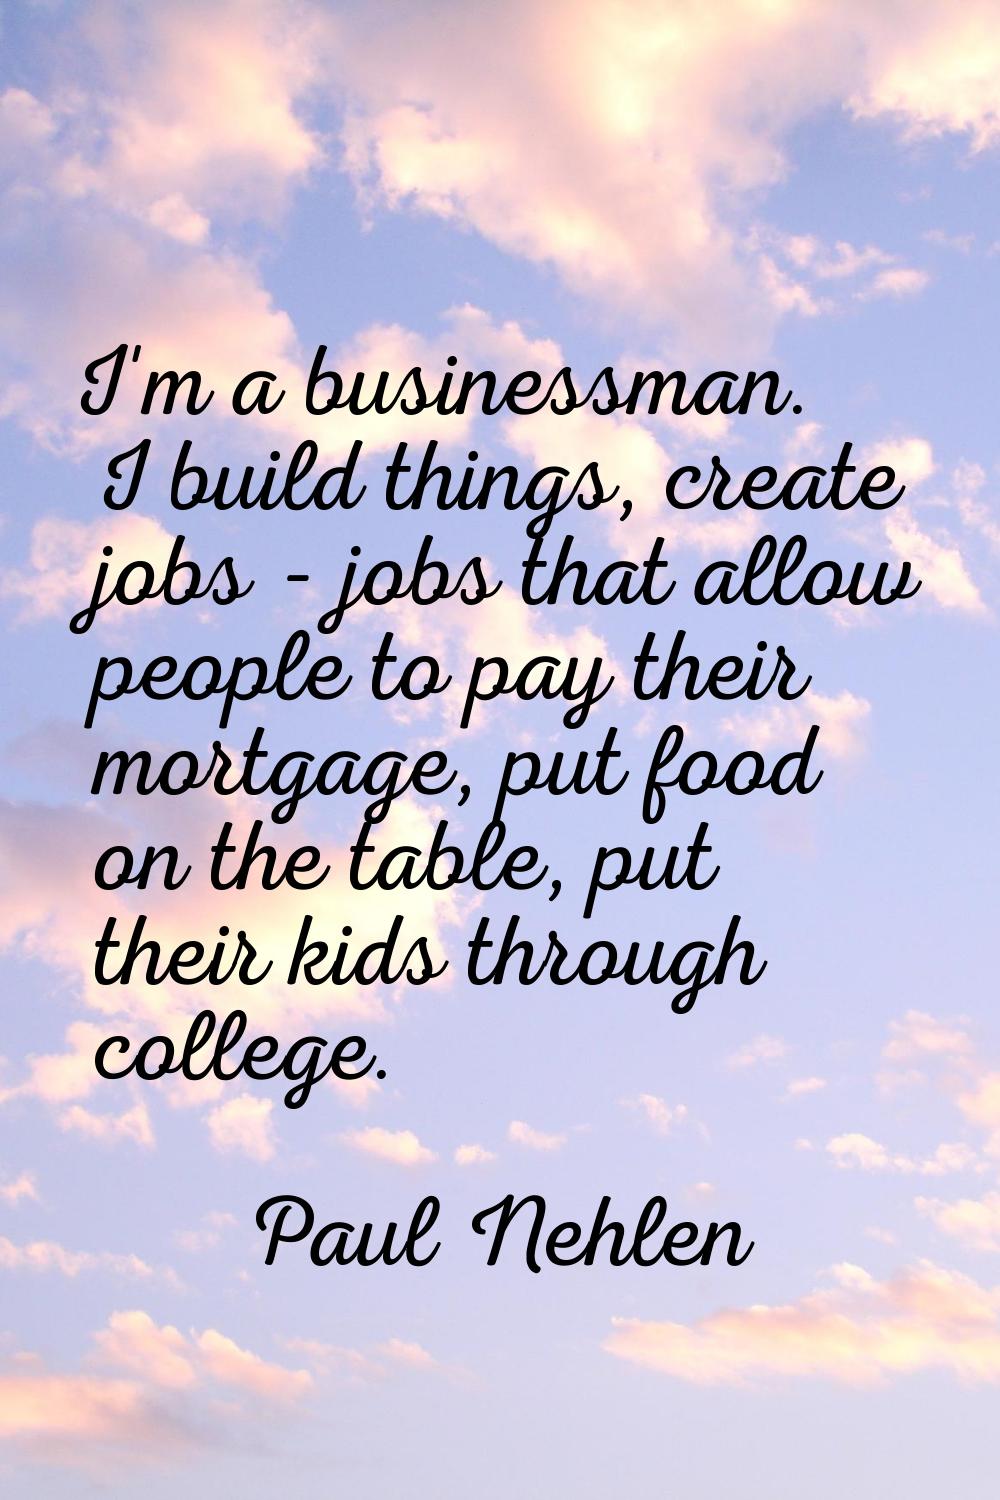 I'm a businessman. I build things, create jobs - jobs that allow people to pay their mortgage, put 